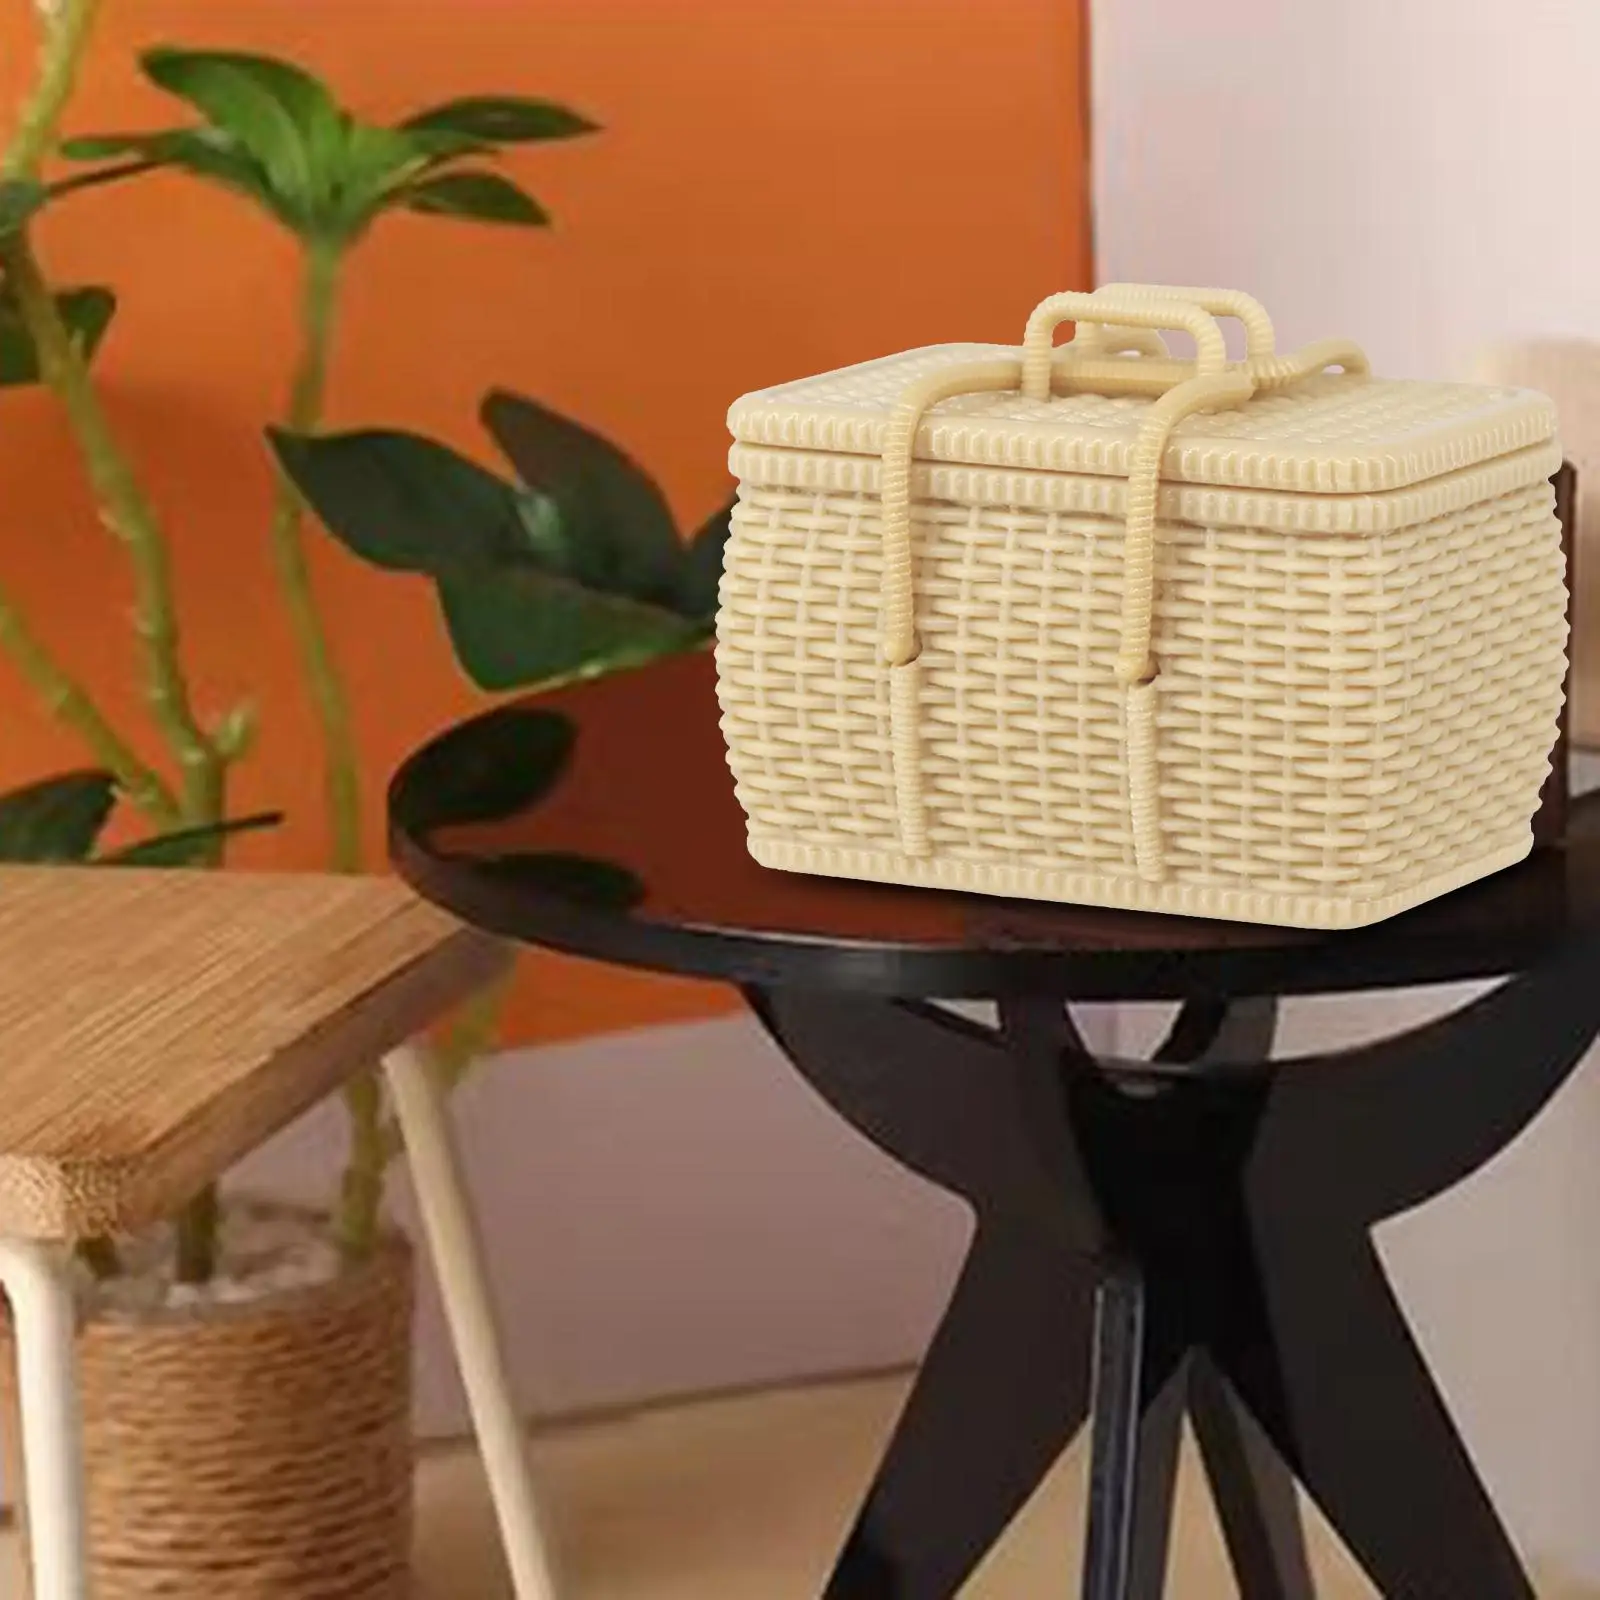 1/6 Doll House Basket Realistic Accessories Dollhouse Storage Basket for Pretend Play Photography Prop Action Figures Accs